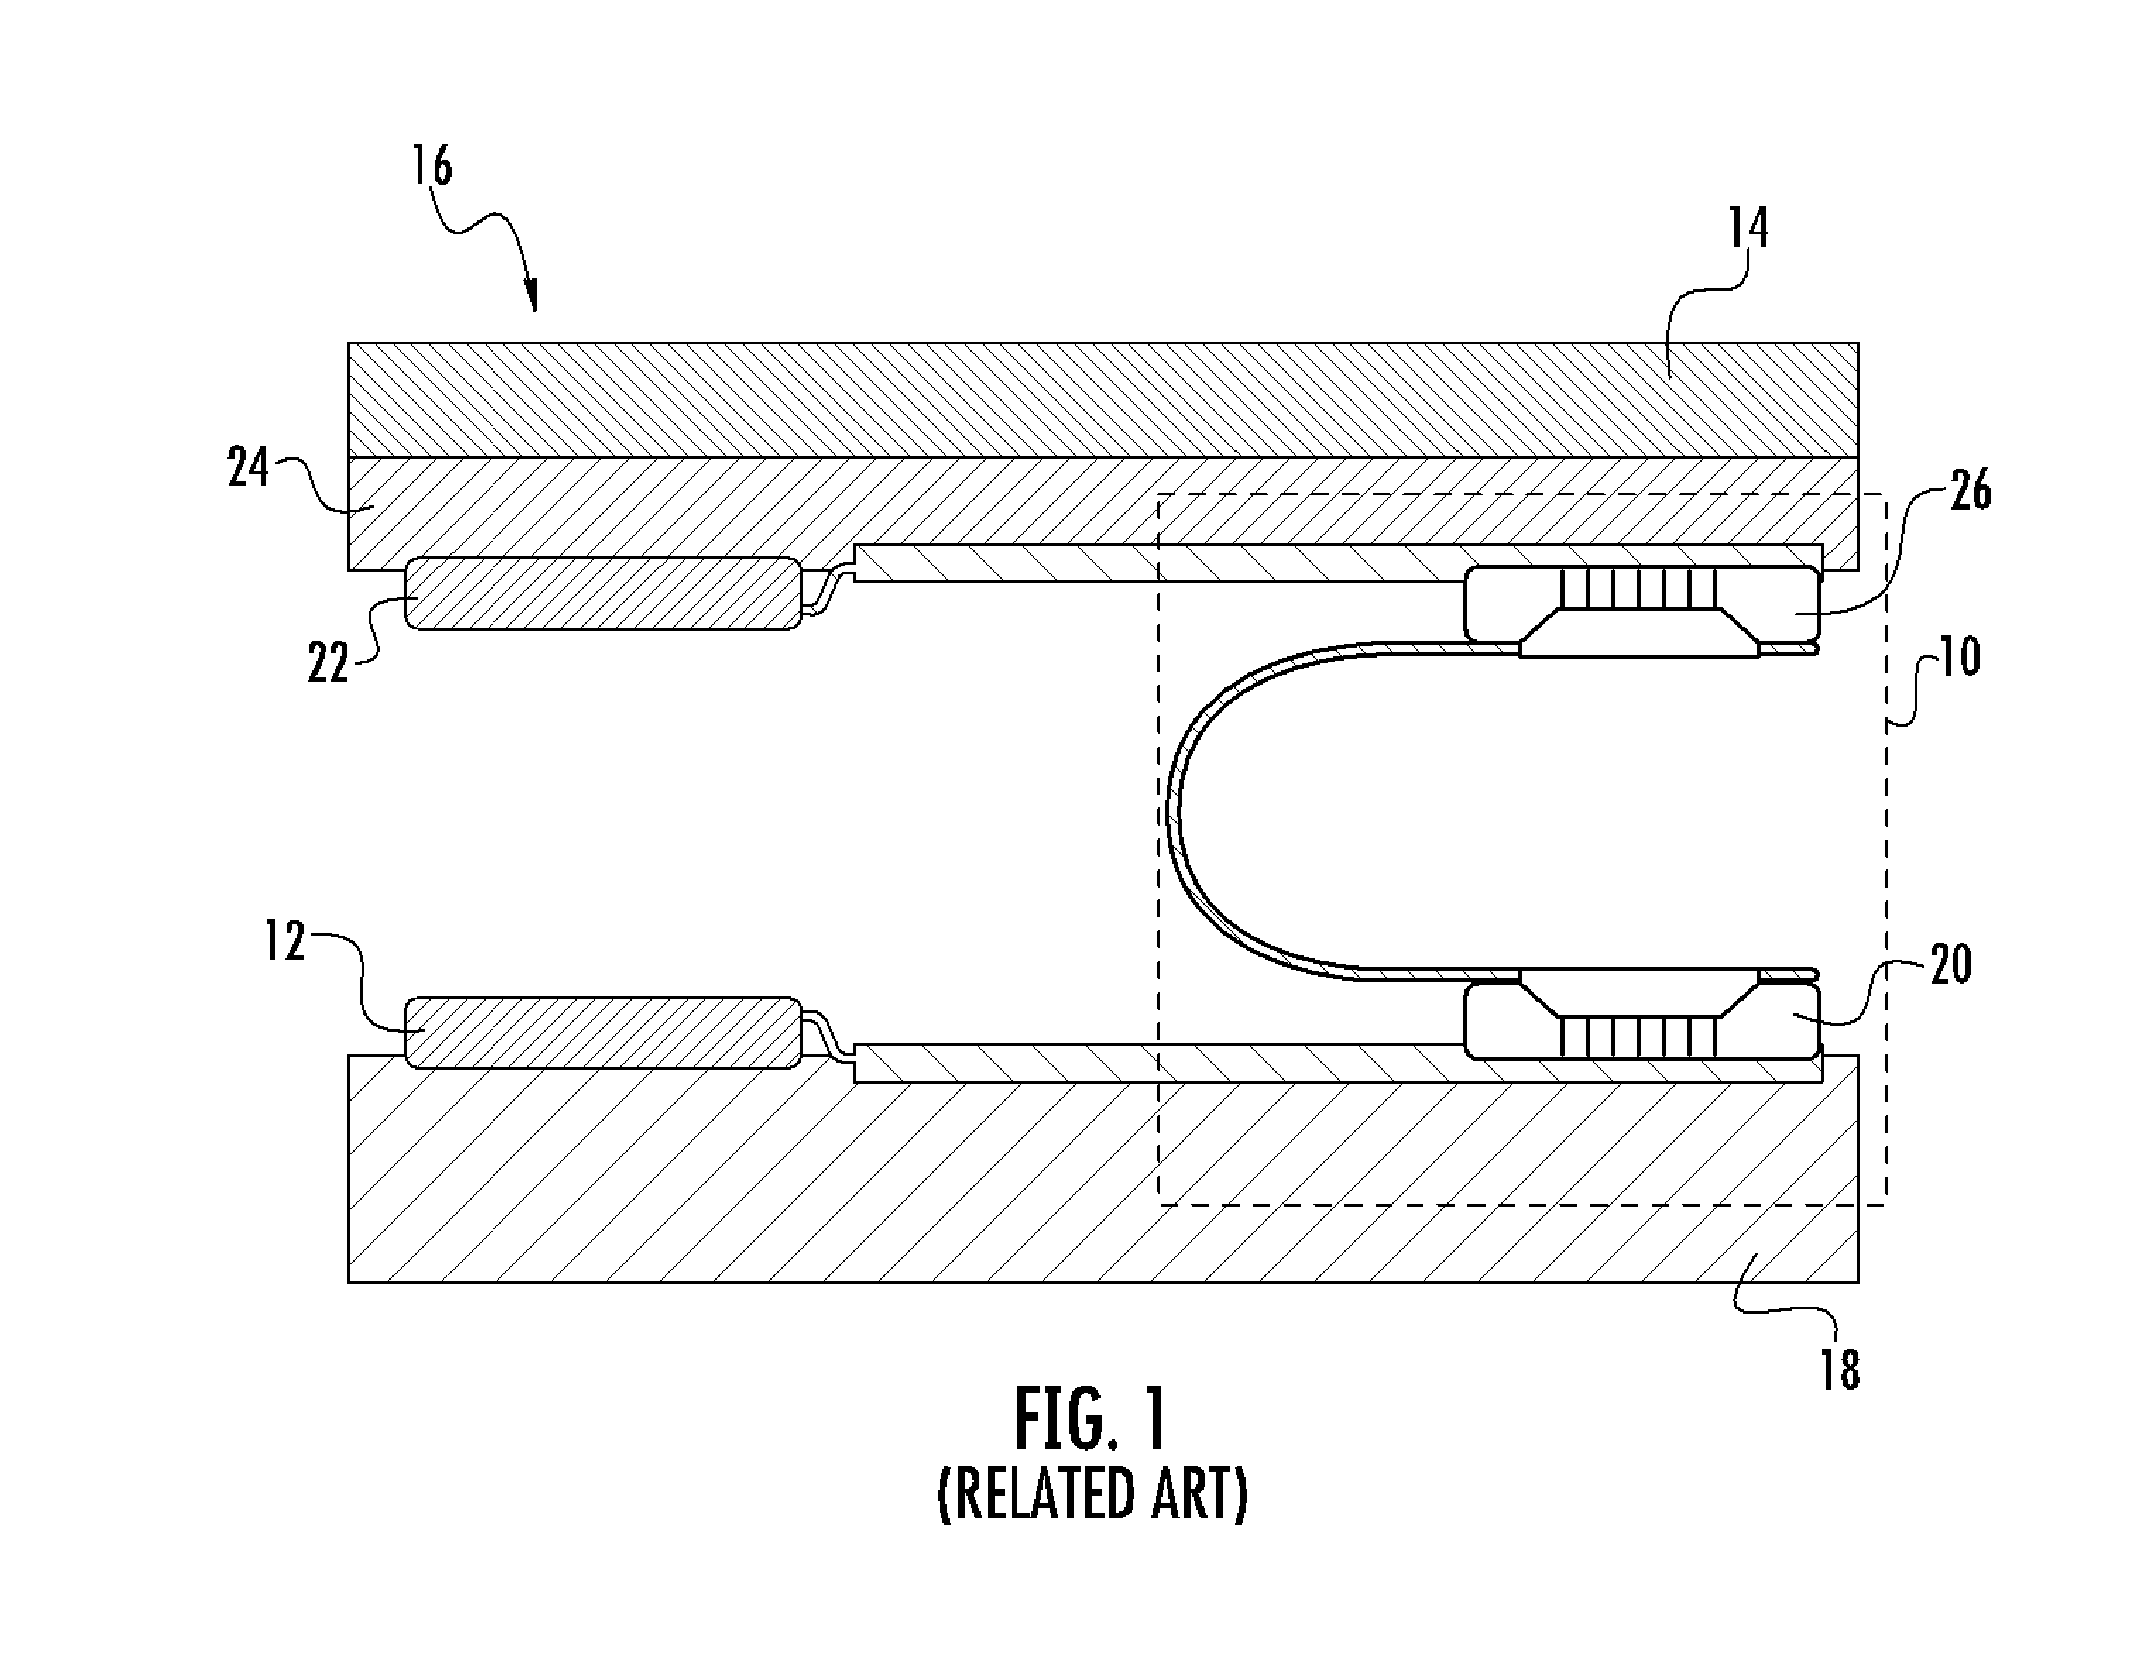 Contactless data communication using in-plane magnetic fields, and related systems and methods